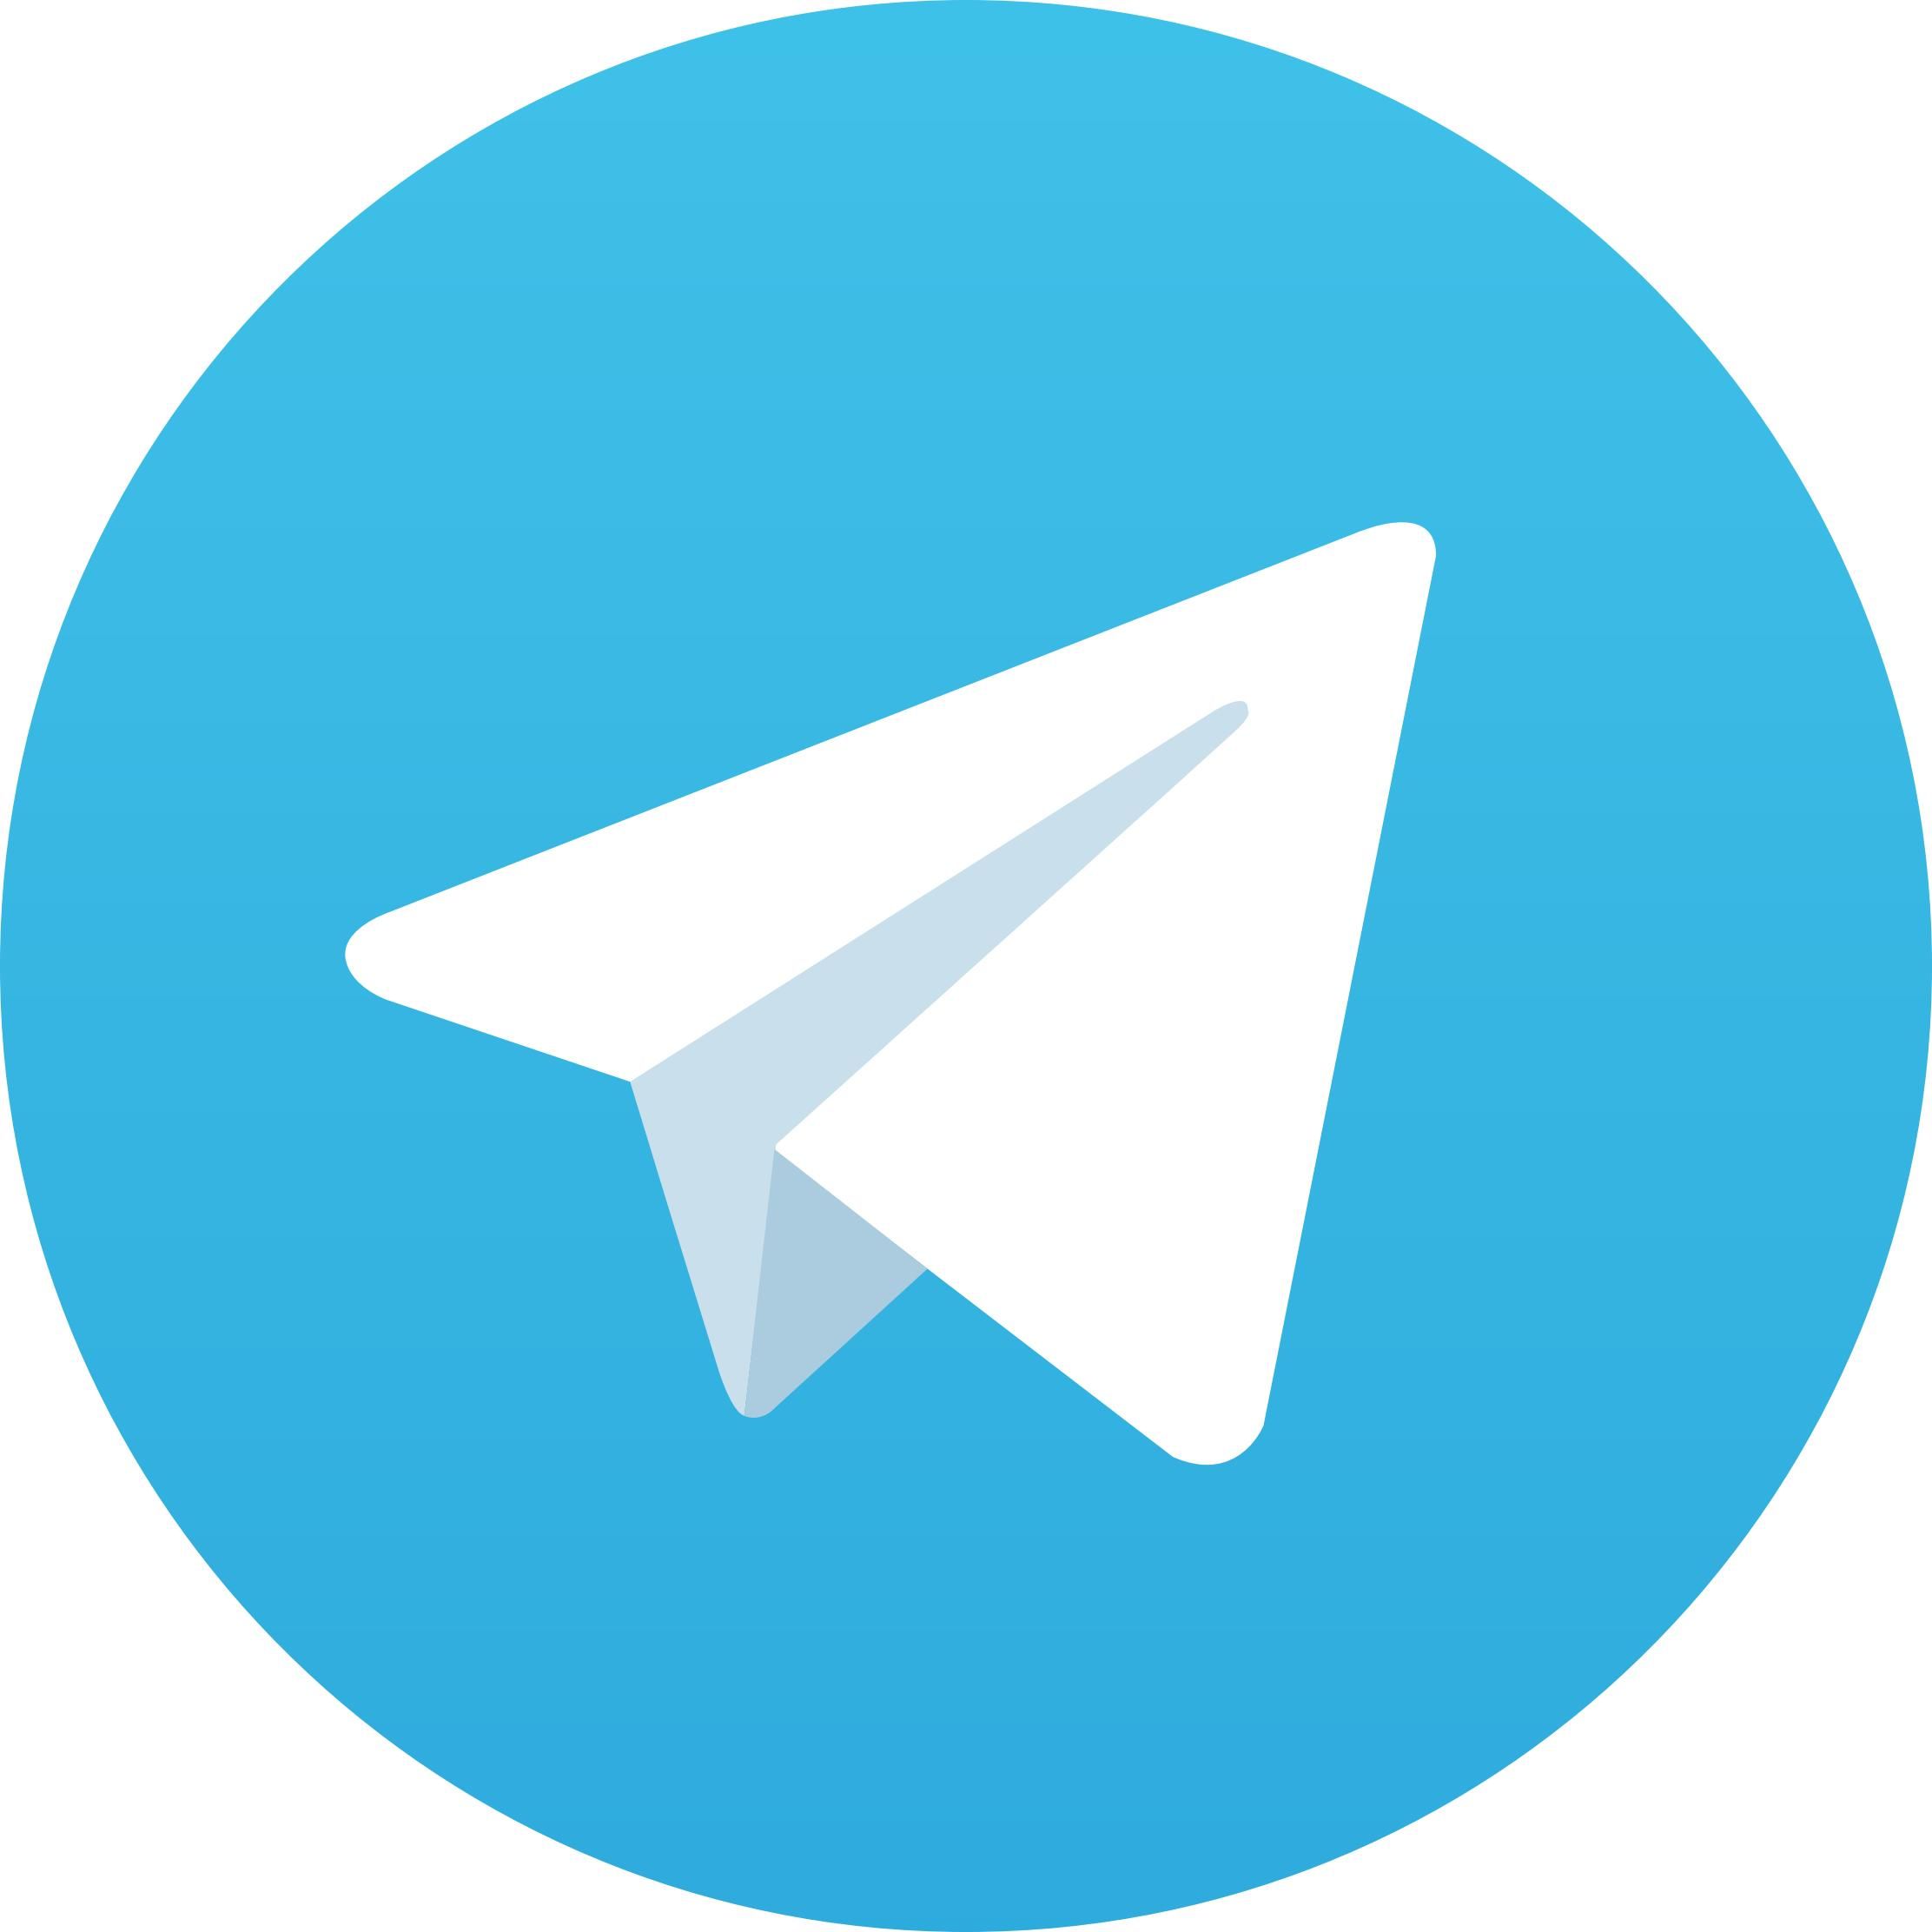 Telegram's most recent update brings various pinned messages, Live